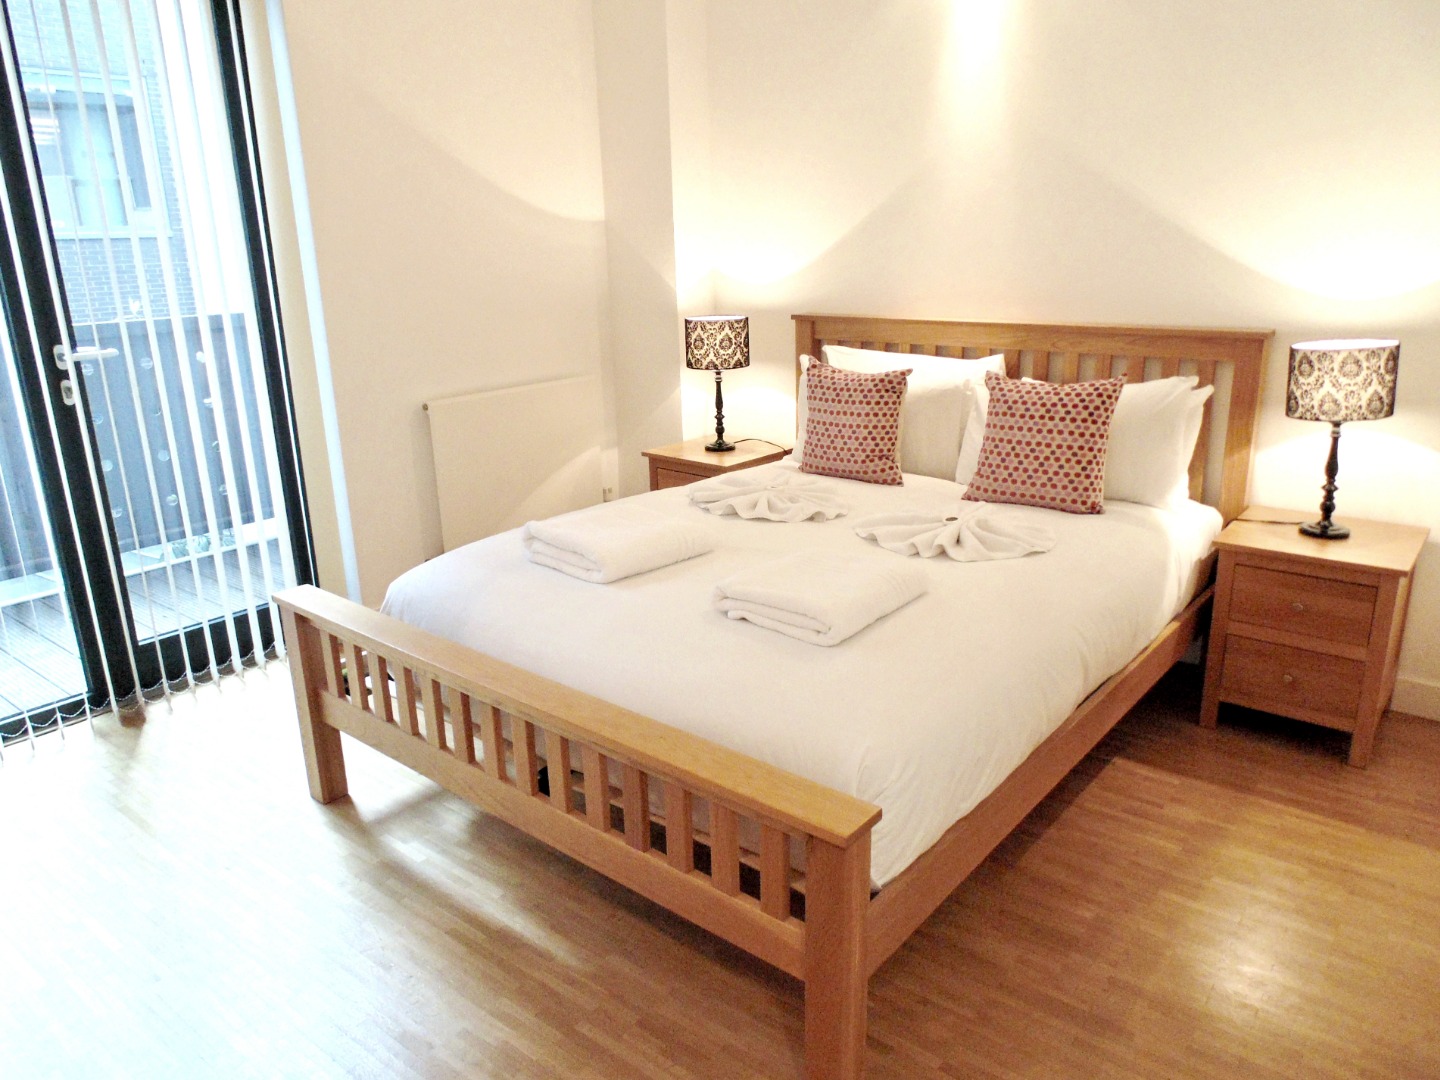 Short Let Accommodation Chancery Lane - Leather Lane Apartments London - Urban Stay Serviced Apartments